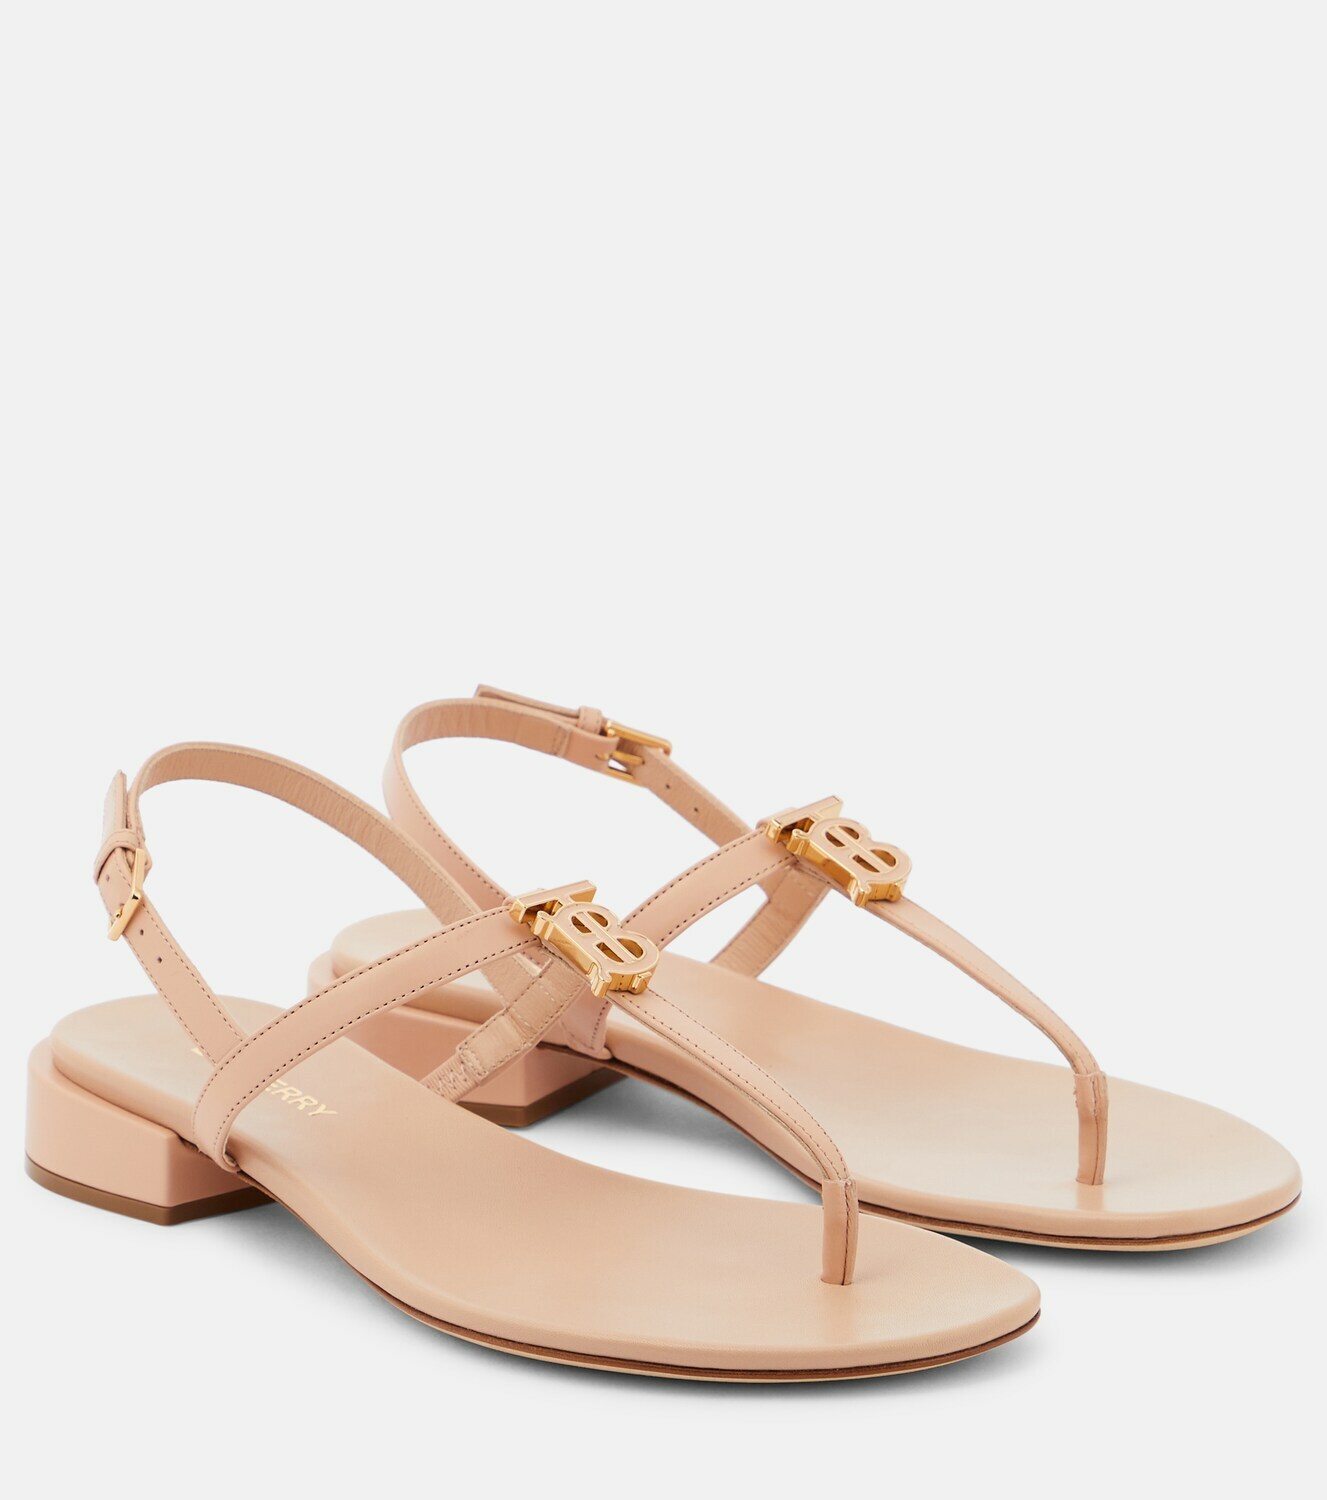 Burberry - Emily 20 leather thong sandals Burberry